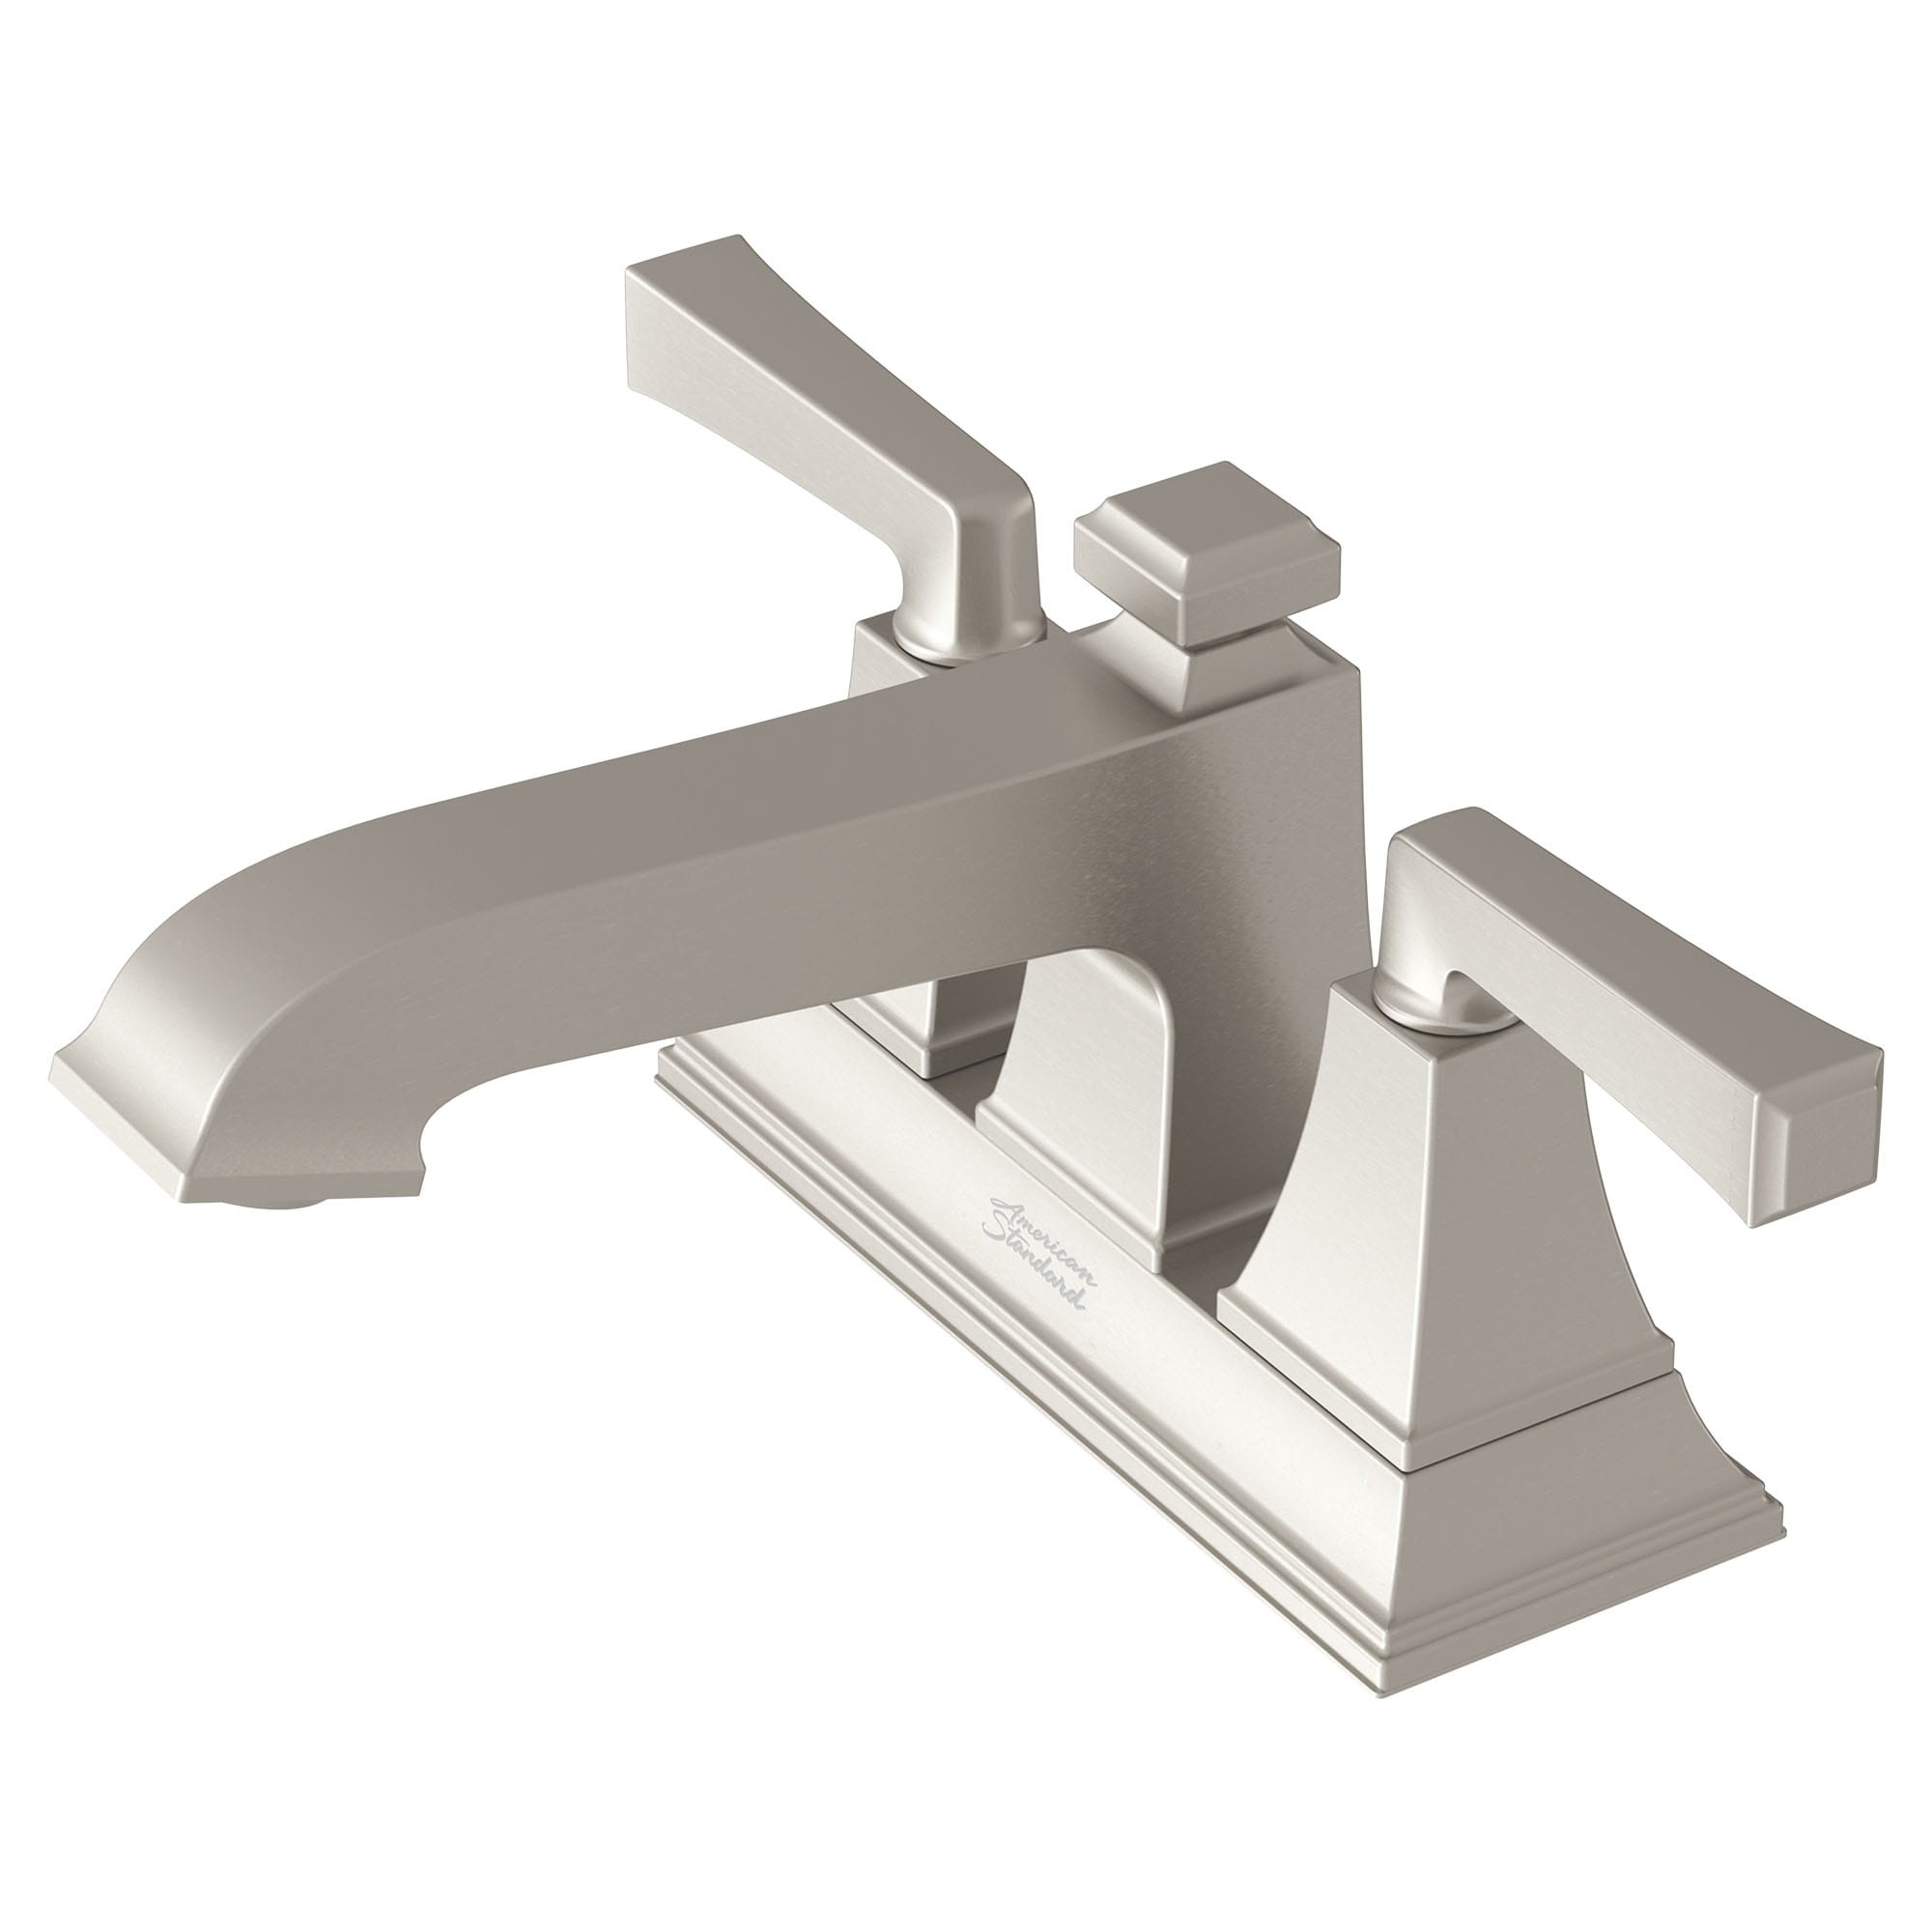 Town Square® S 4-Inch Centerset 2-Handle Bathroom Faucet 1.2 gpm/4.5 L/min With Lever Handles